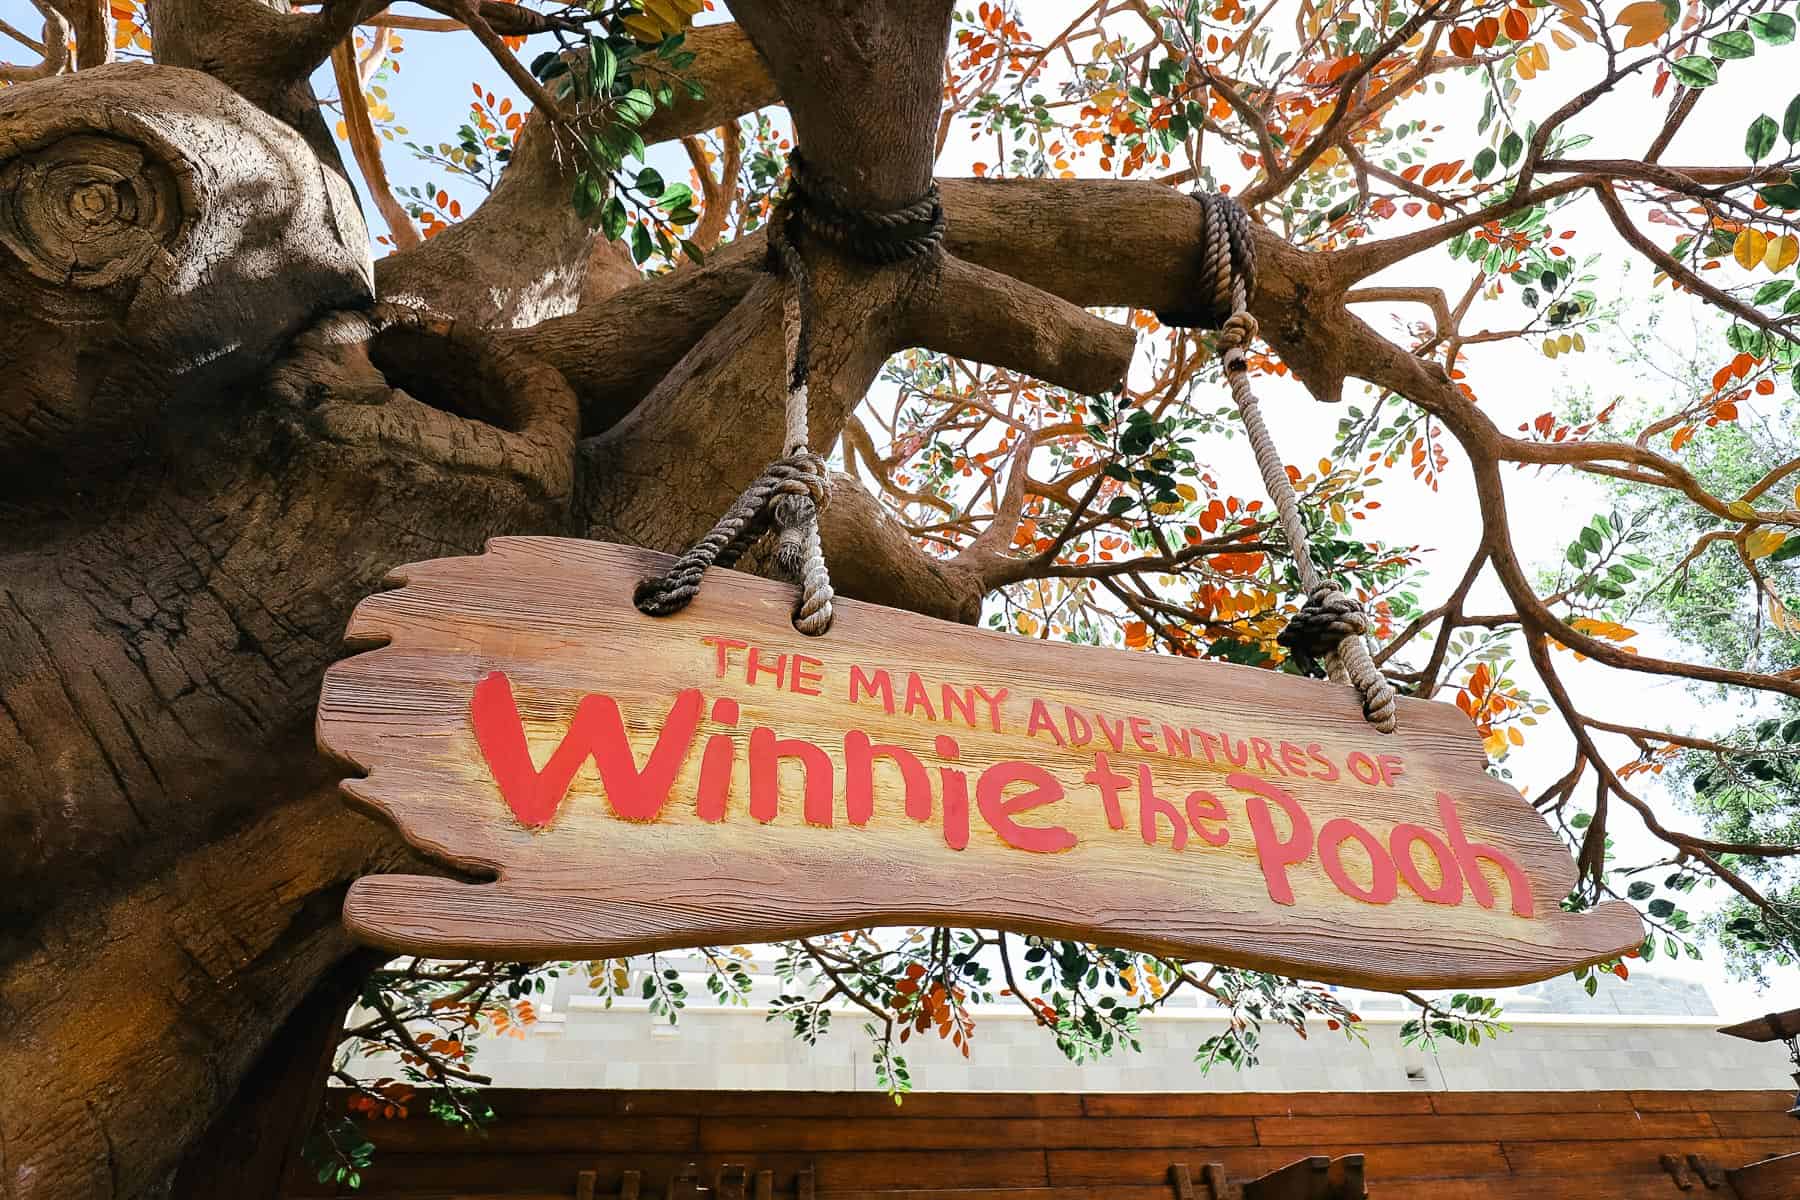 The Many Adventures Of Winnie the Pooh Ride at Disney World (A Resorts Gal Guide)